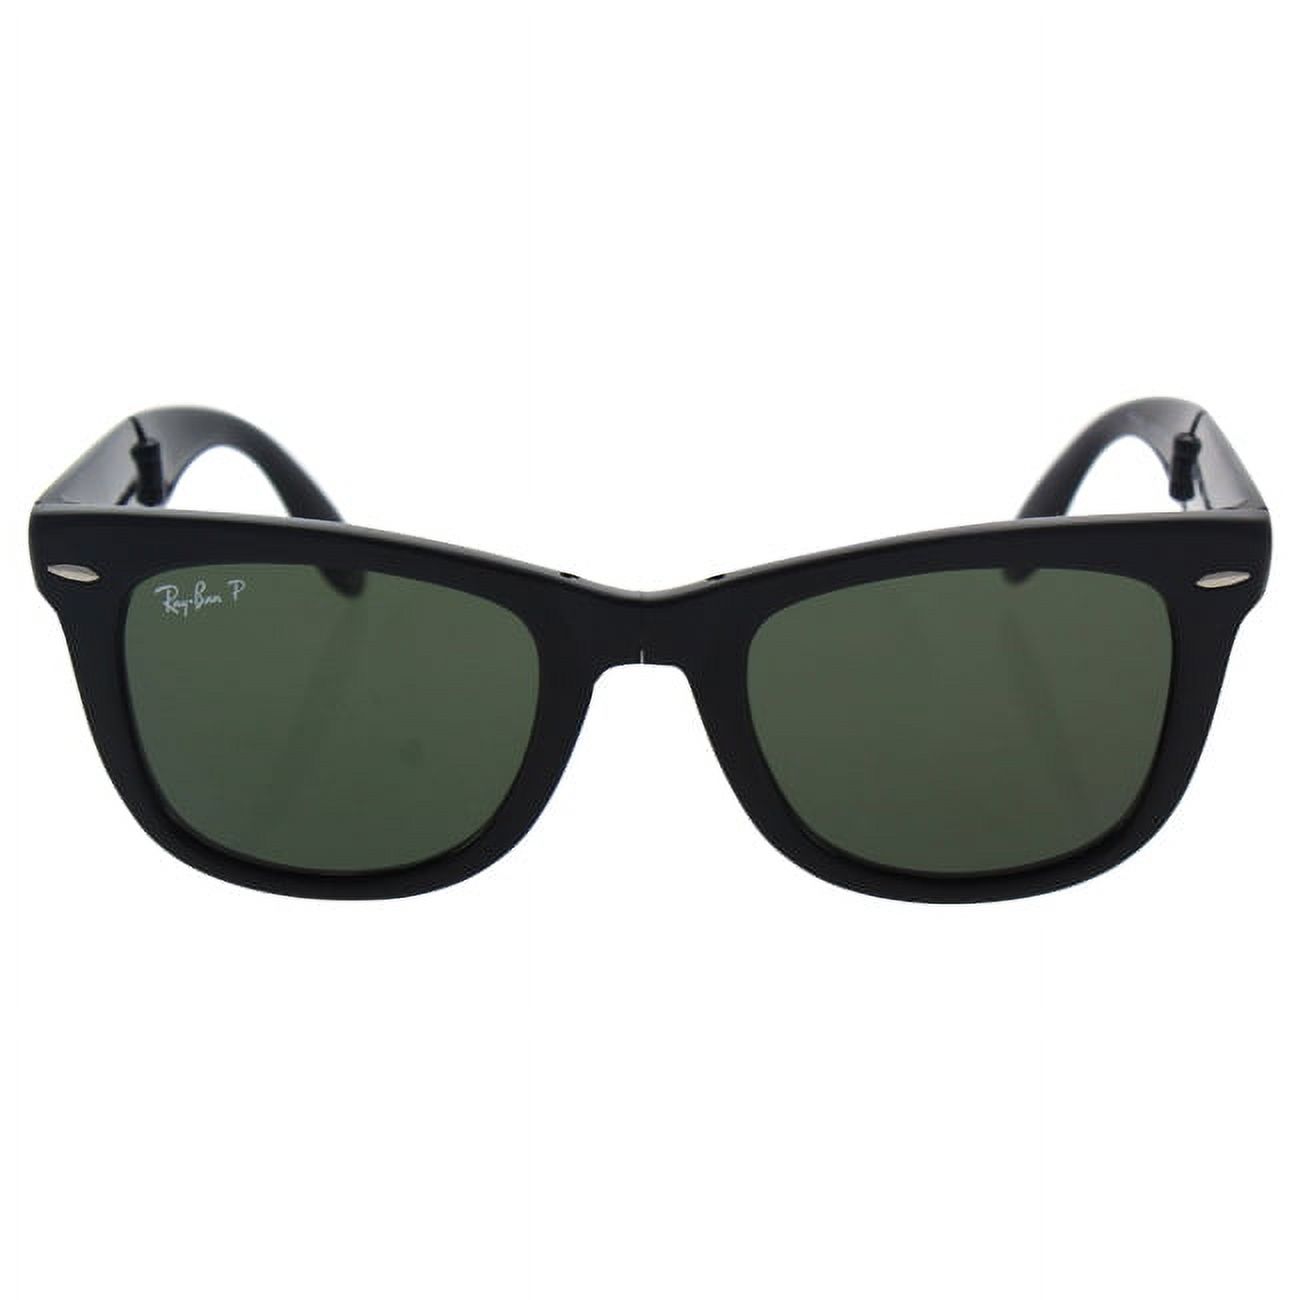 Ray Ban RB 4105 601/58 Folding Wayfarer - Black/Green Polarized by Ray Ban for Unisex - 50-22-140 mm Sunglasses - image 1 of 2